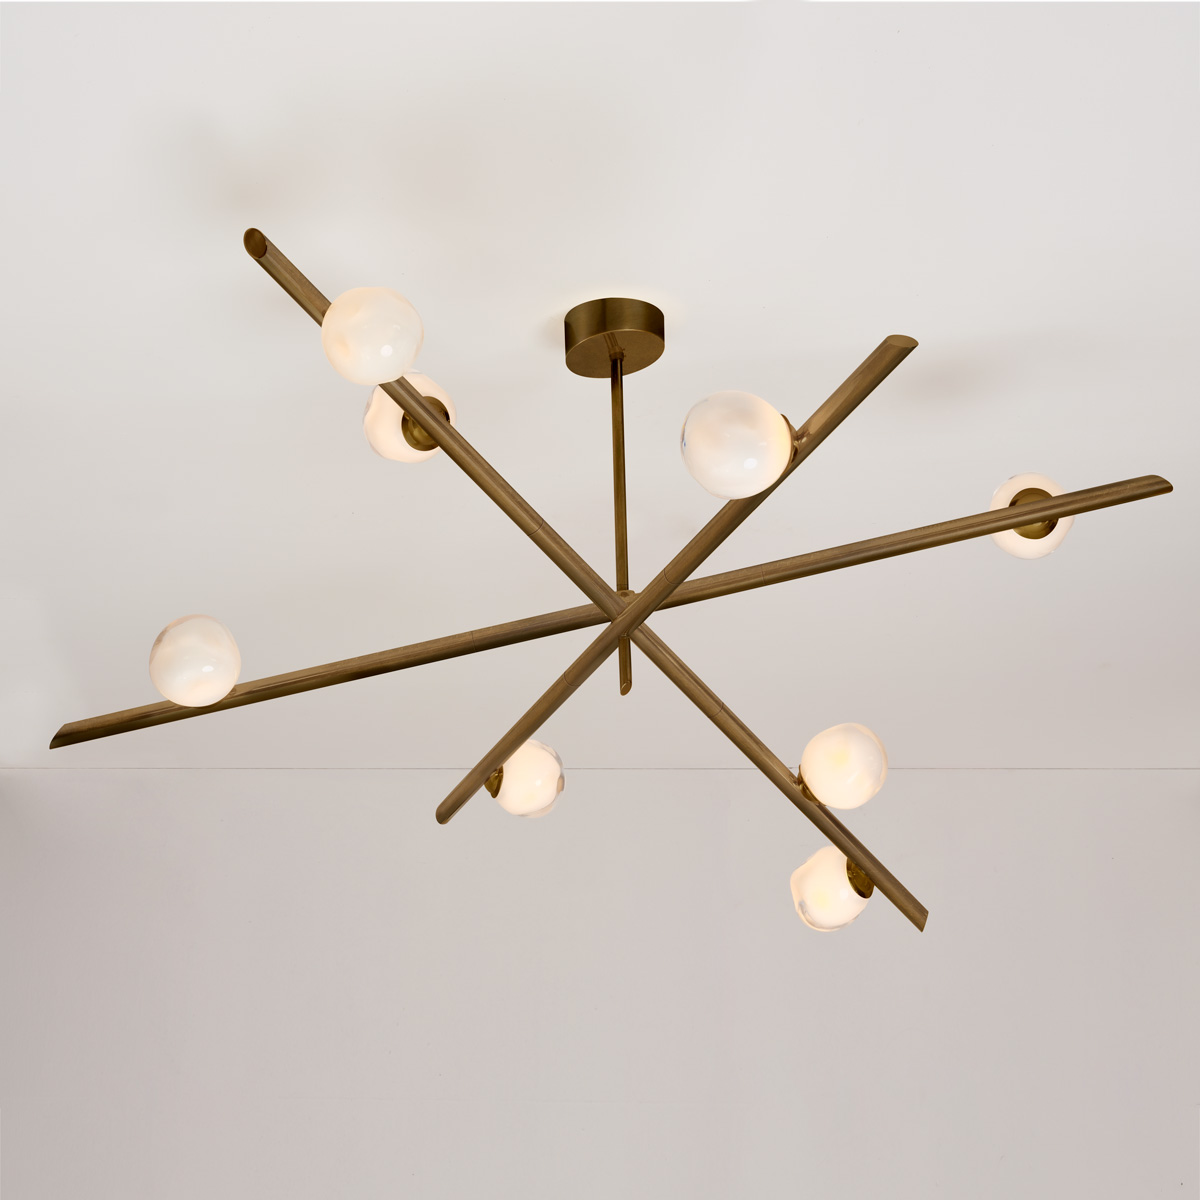 antares x3 ceiling light by gaspare asaro